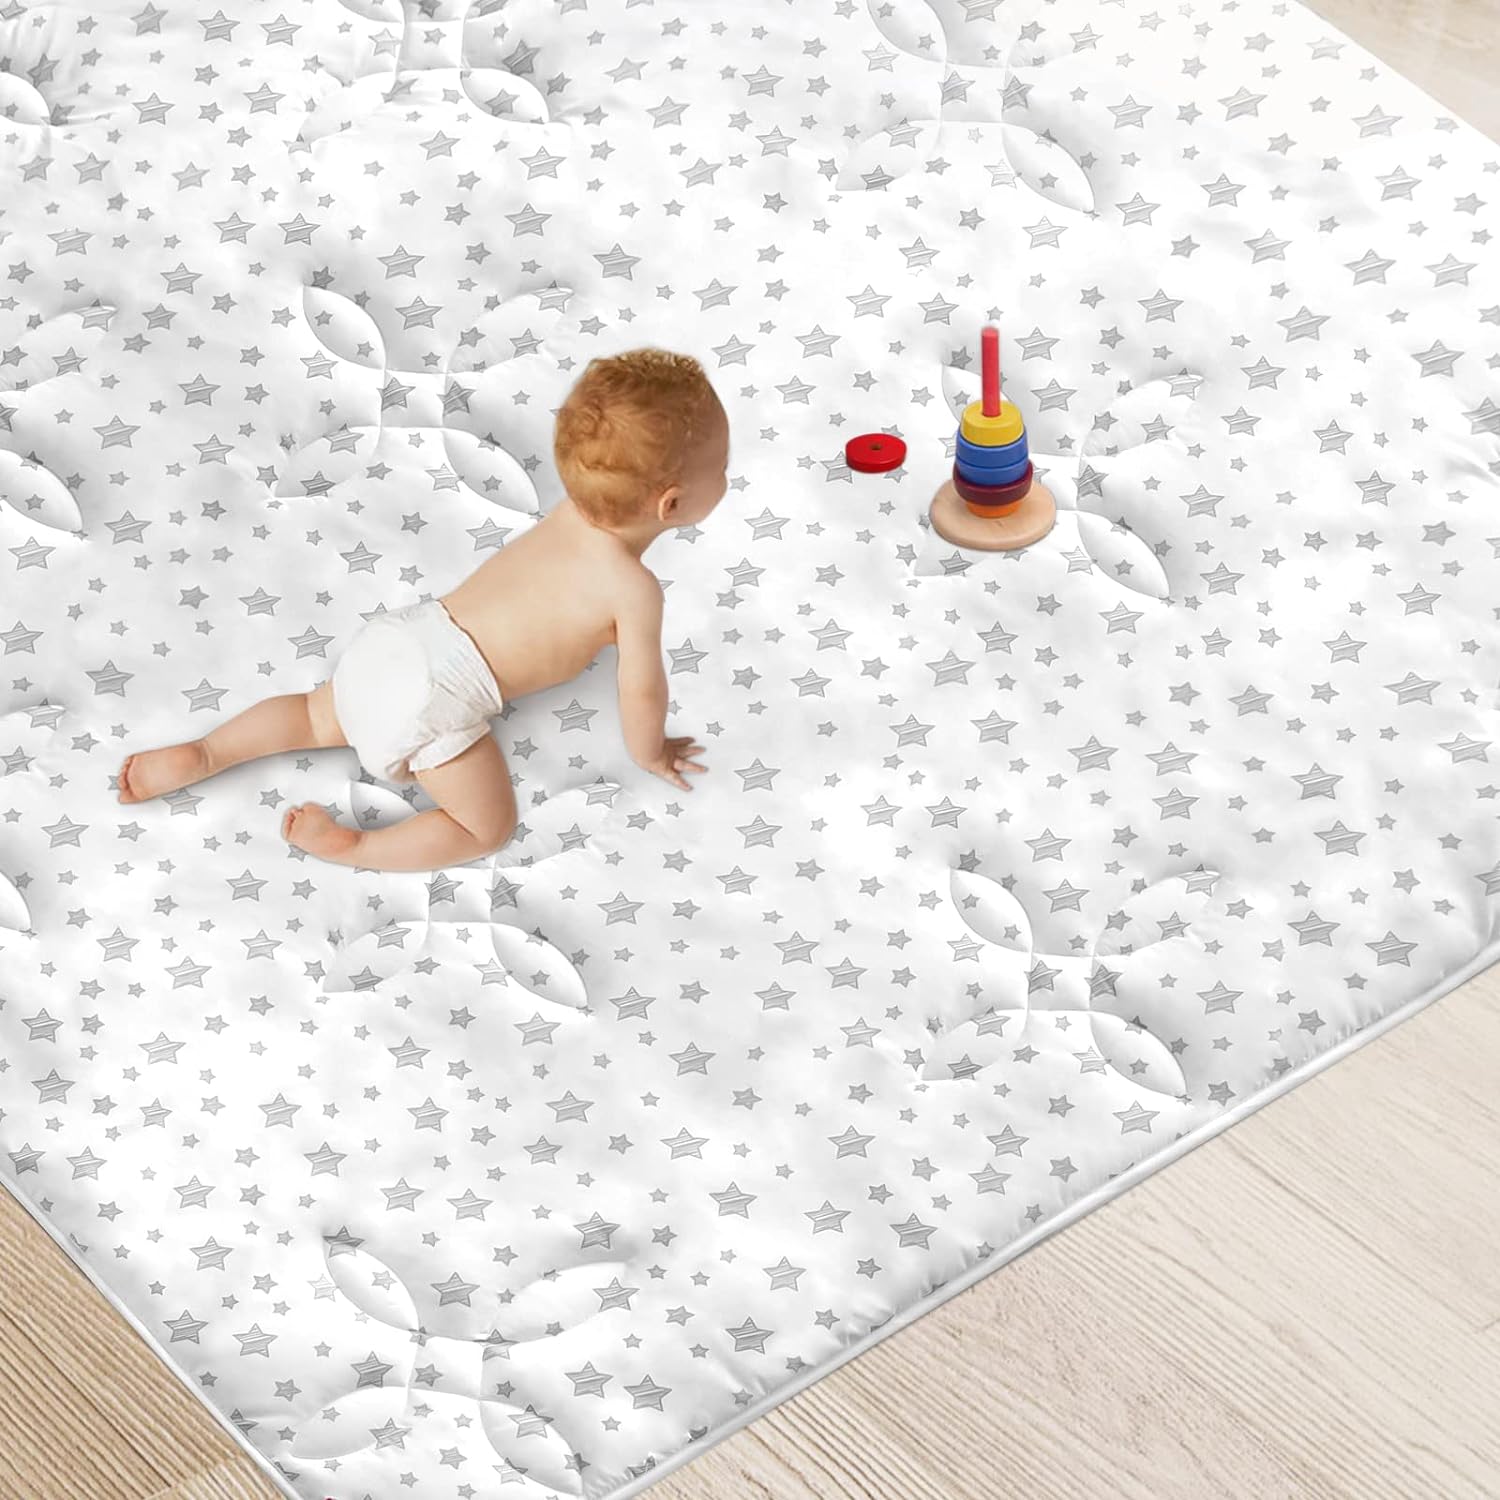 Baby Play Mat | Playpen Mat - 72" x 59", Large Padded Tummy Time Activity Mat for Infant & Toddler, Quilted with Four-Leaf Clover, White Star - Moonsea Bedding